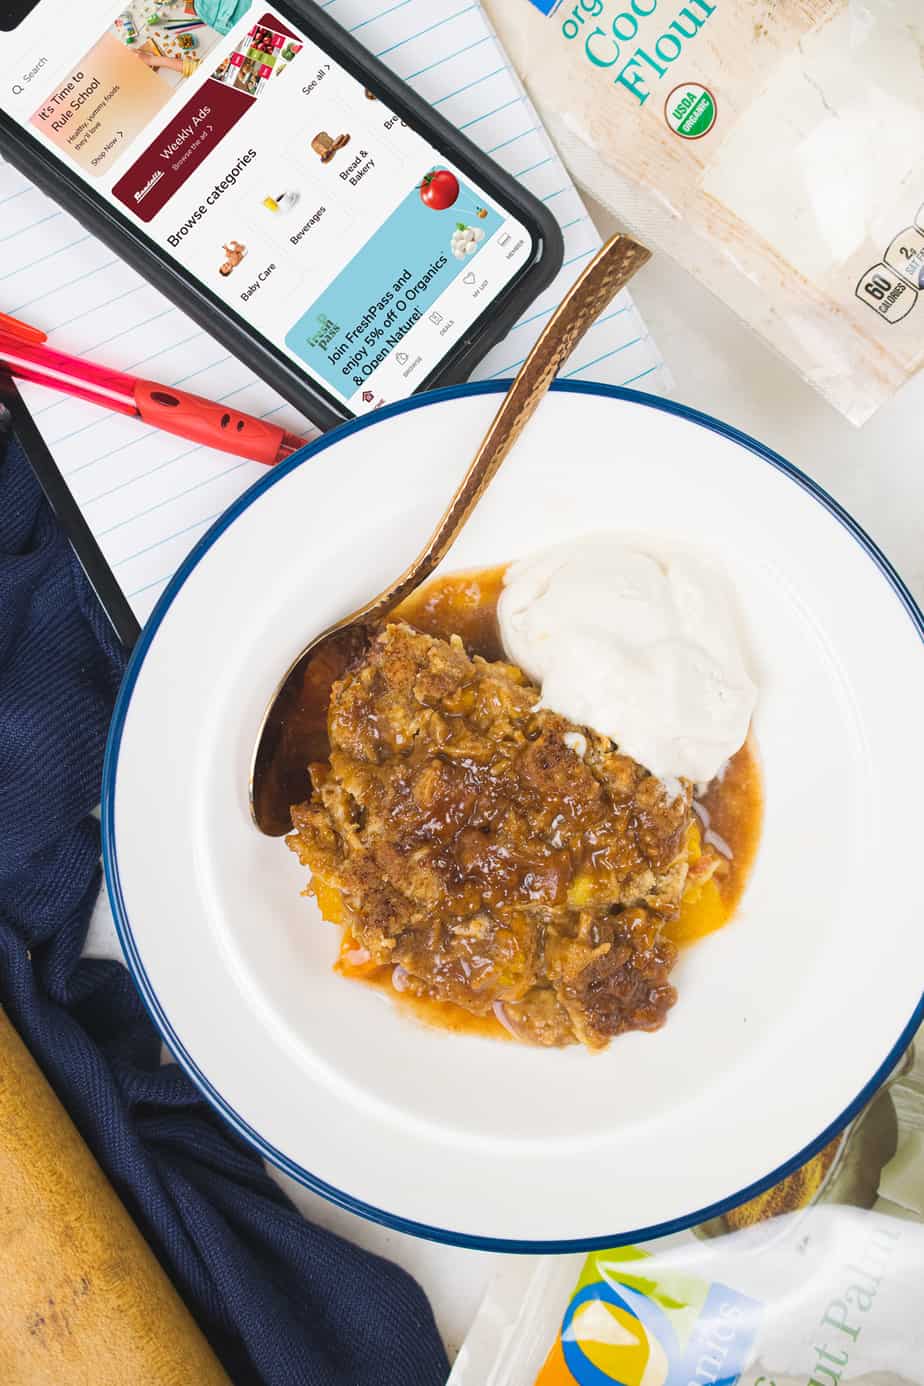 aip peach cobbler with icecream on the side in a bowl with a spoon set on a desk with a notepad a red ped and an iphone opened up to the Randalls app and a bag of coconut flour in background